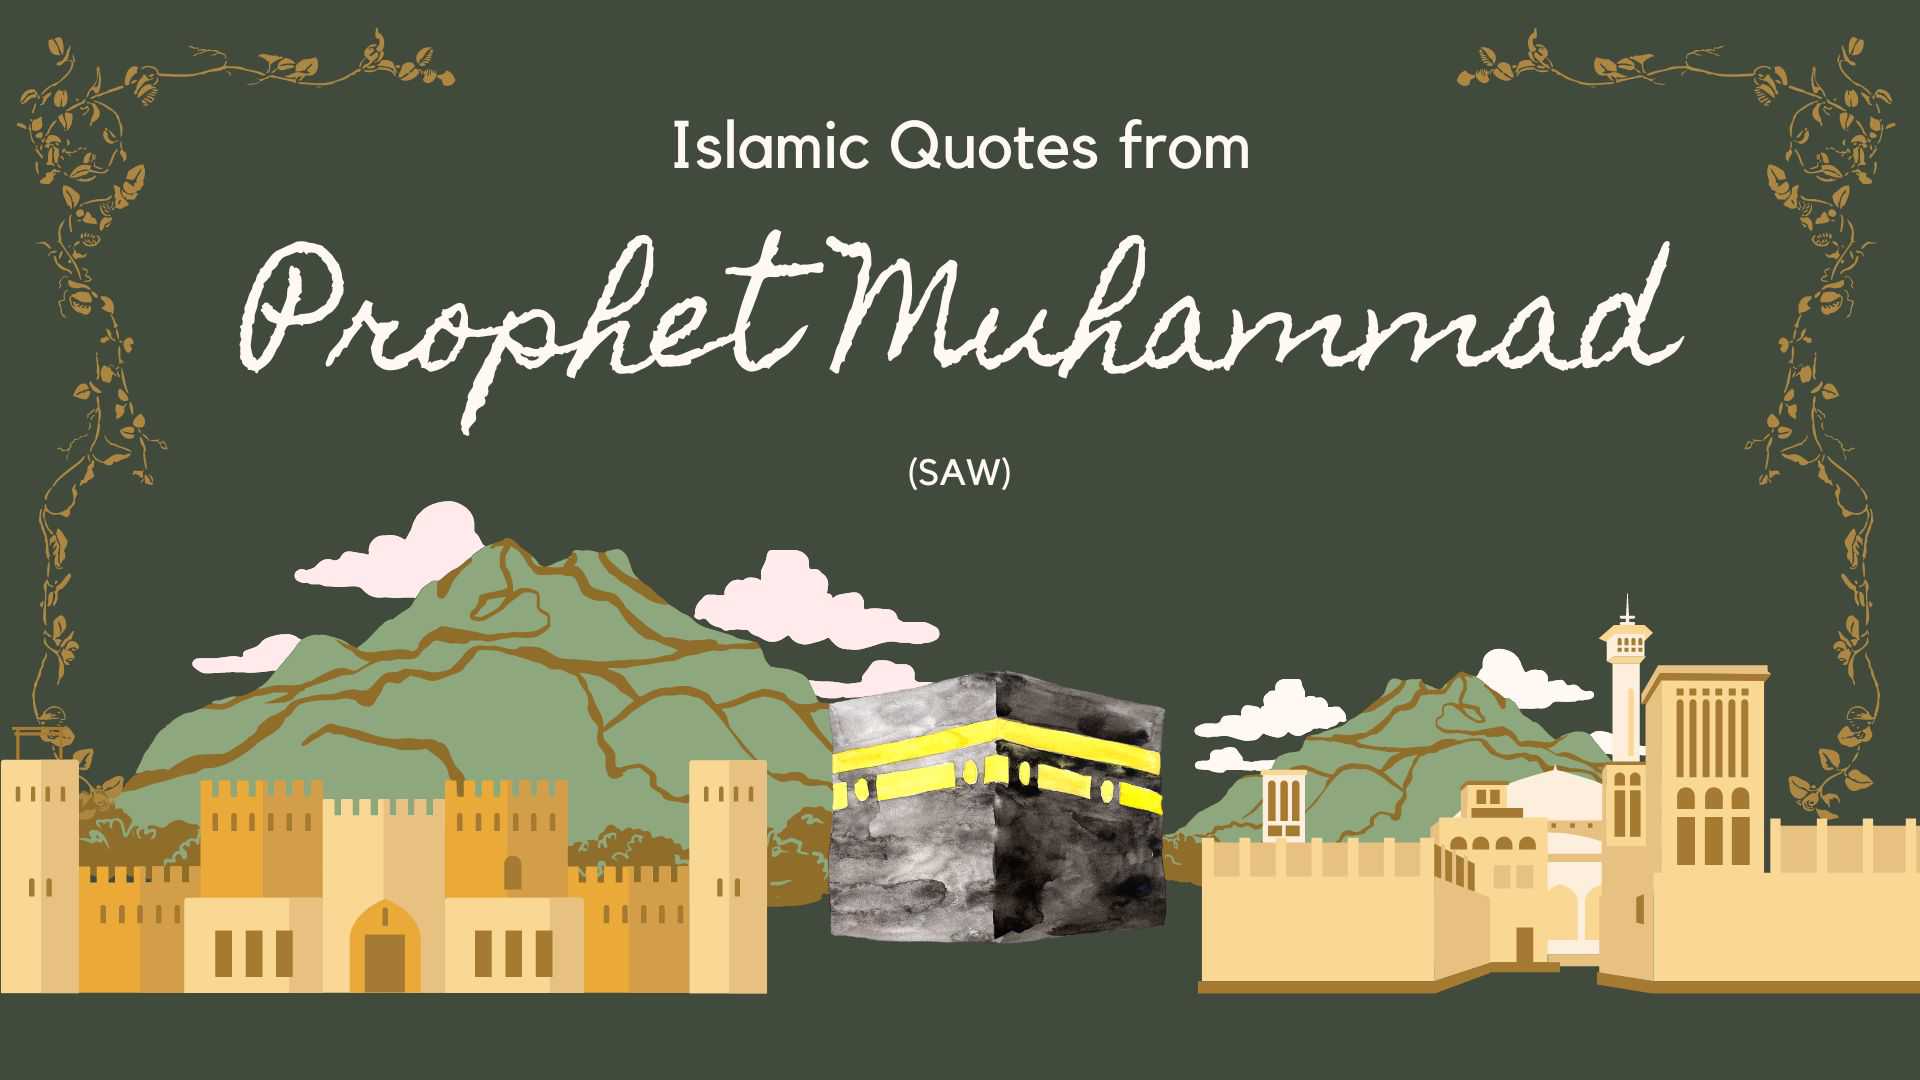 Islamic Quotes from PROPHET MUHAMMAD